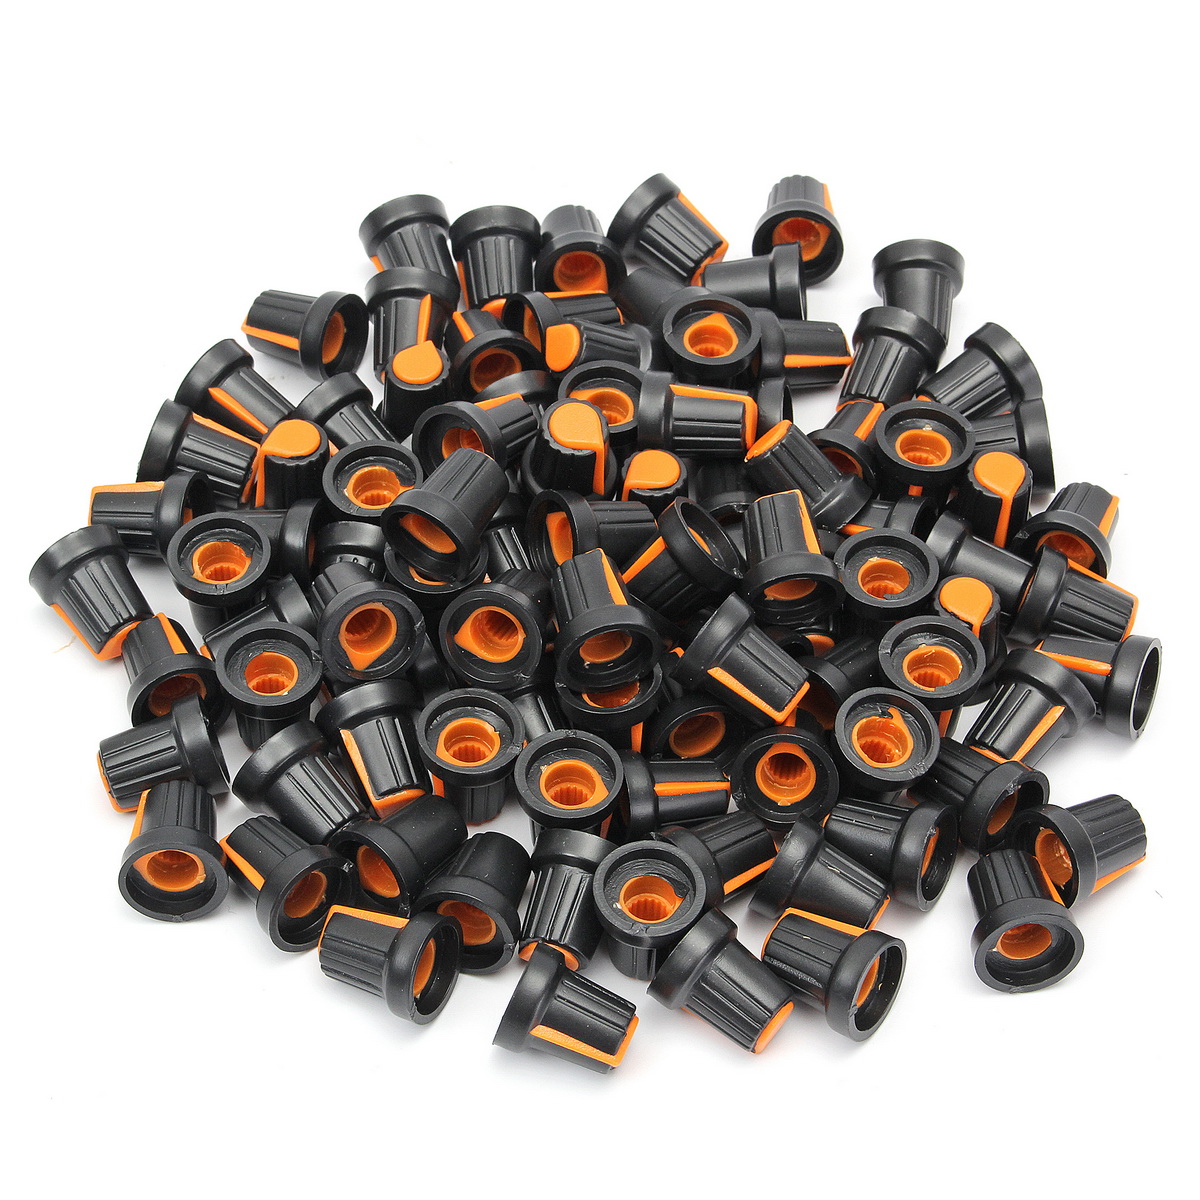 

100Pcs Volume Potentiometer Control Rotary Knobs For 6mm Dia Knurled Shaft